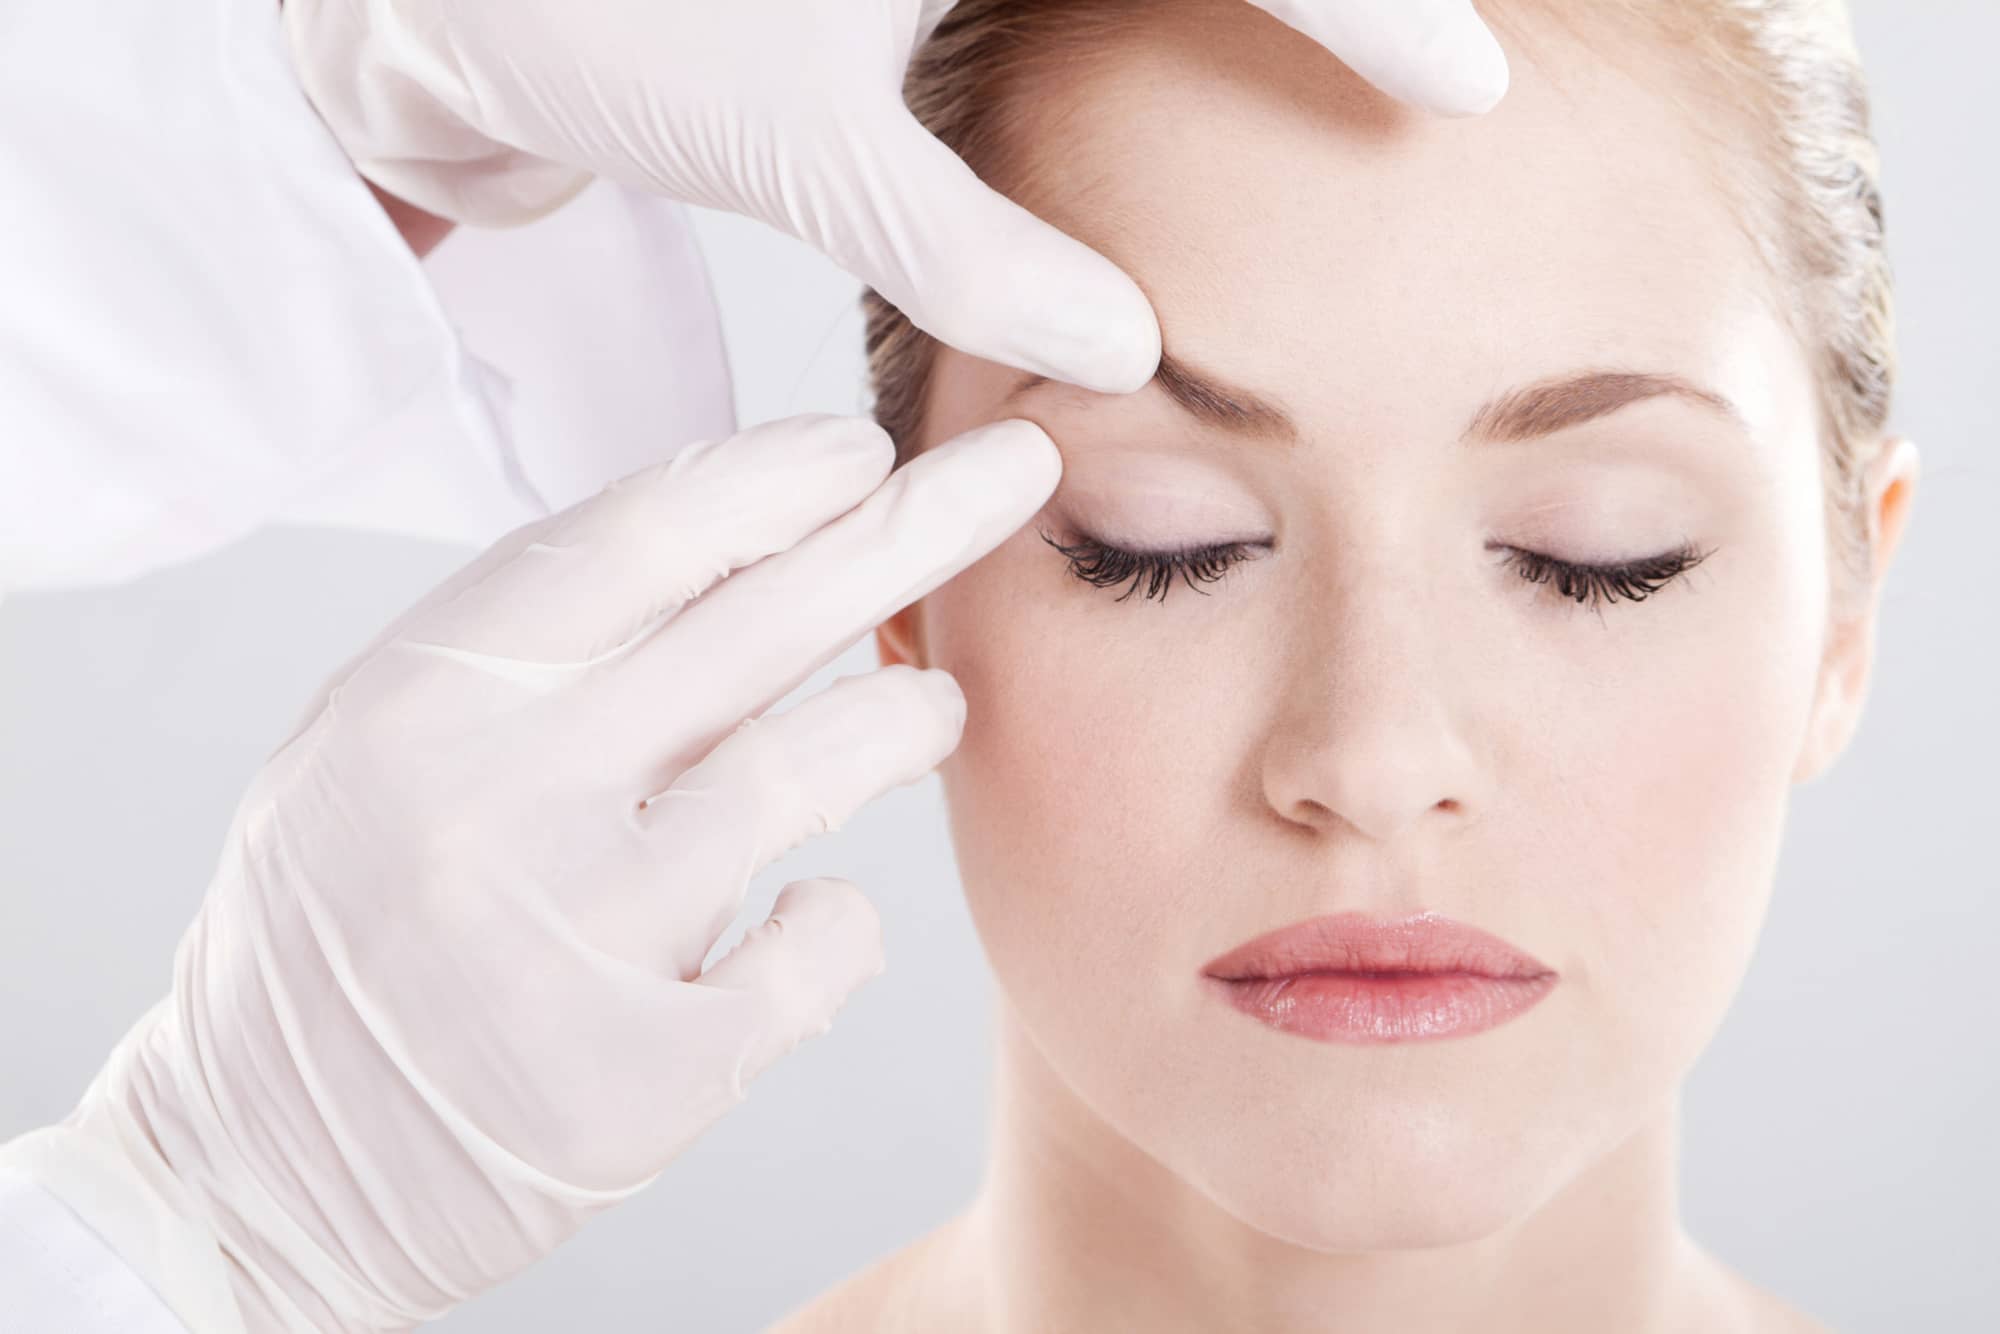 Cosmetic Surgery vs Reconstructive Surgery: What's the Difference?